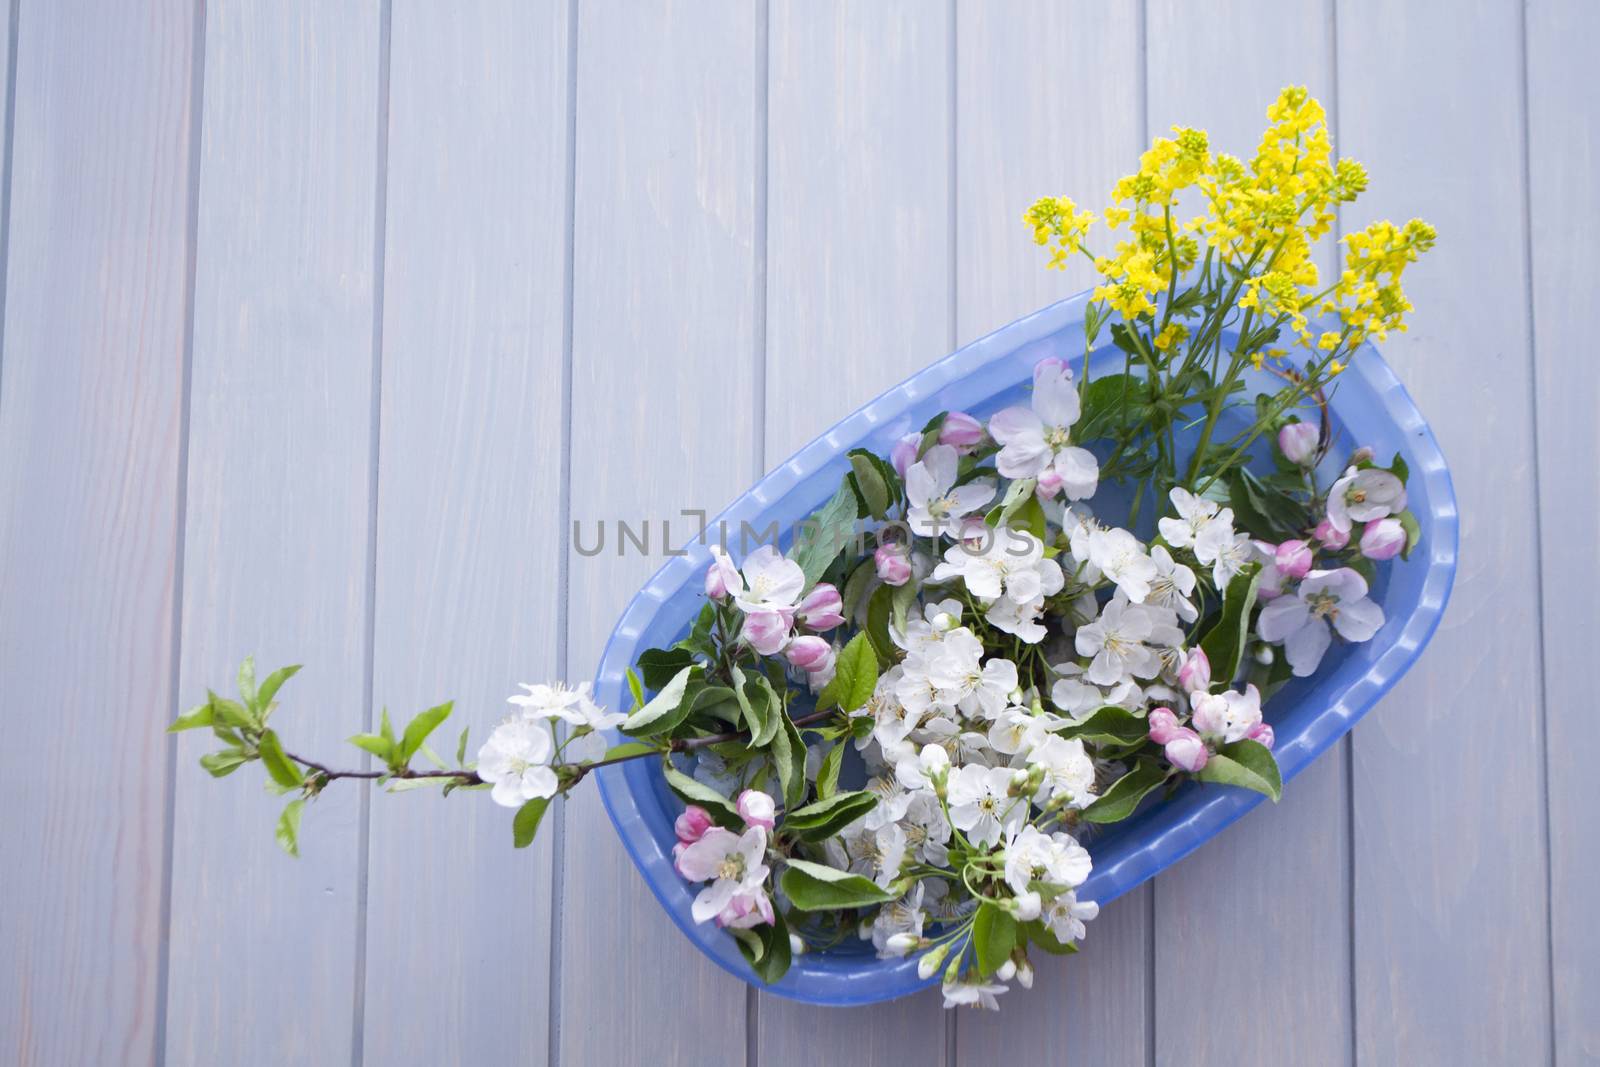 Festive flower composition frame on the blue planks wooden background. Overhead view.